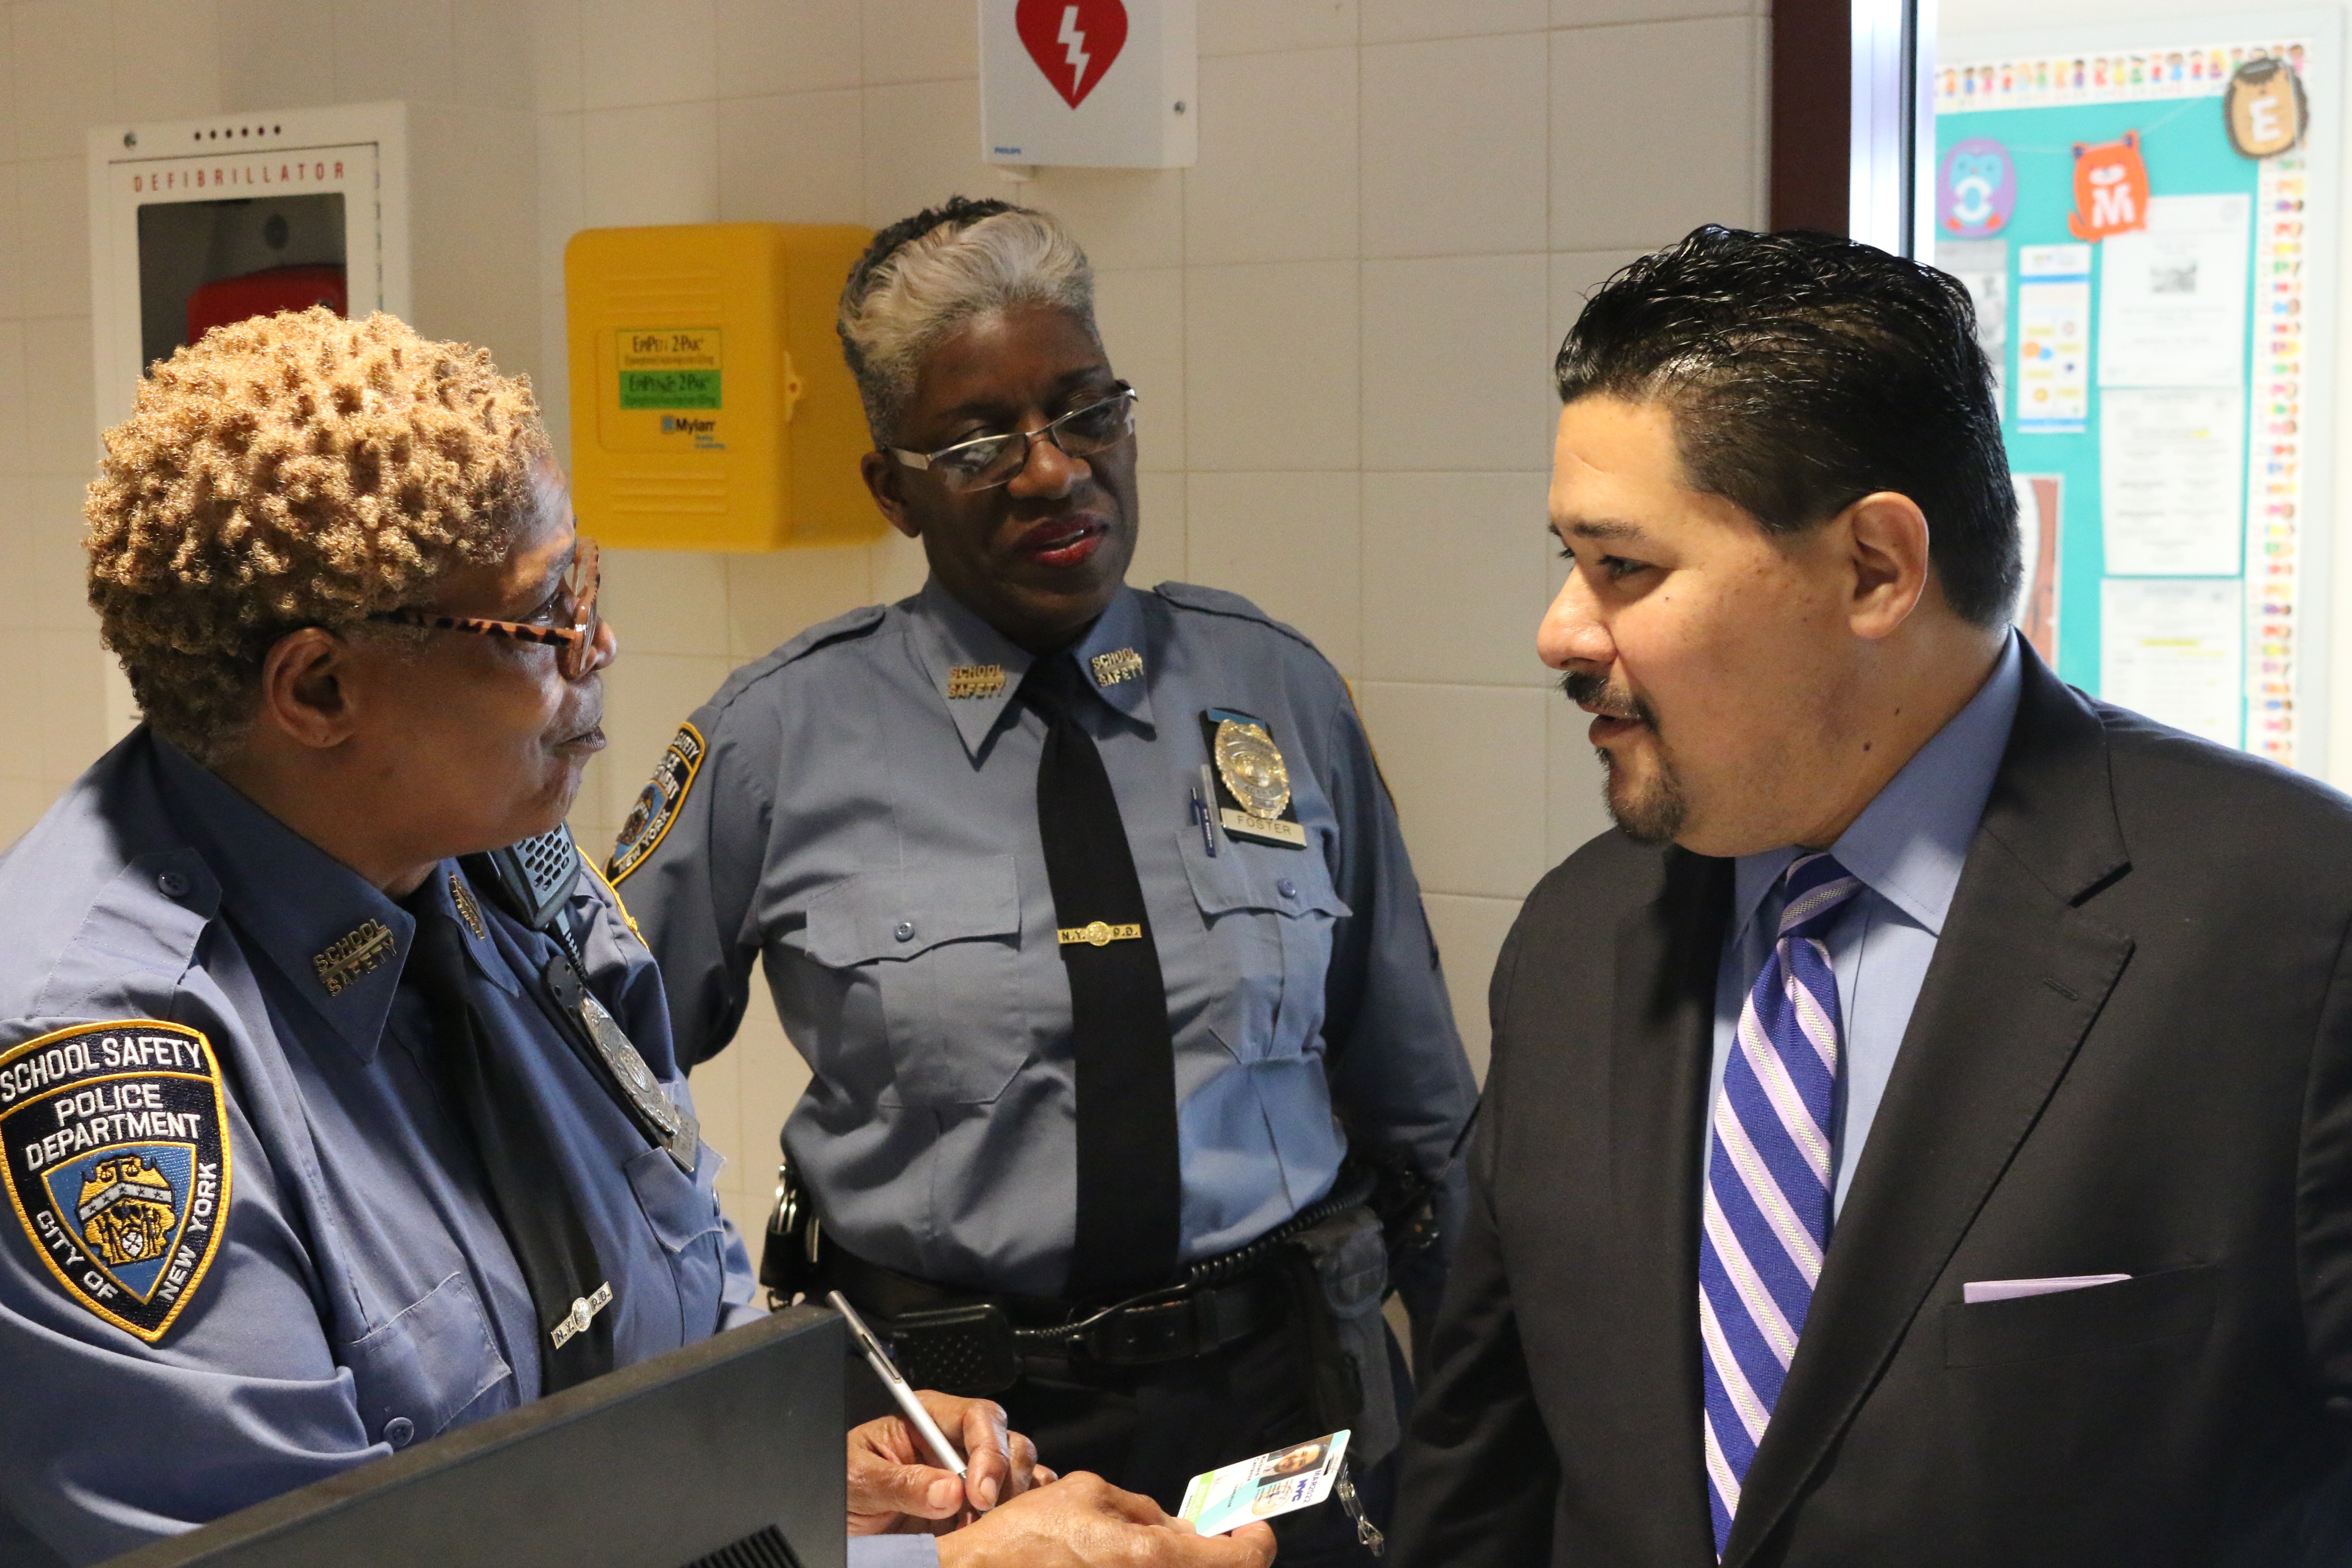 Schools Chancellor Richard Carranza chats with school safety agents on Staten Island.